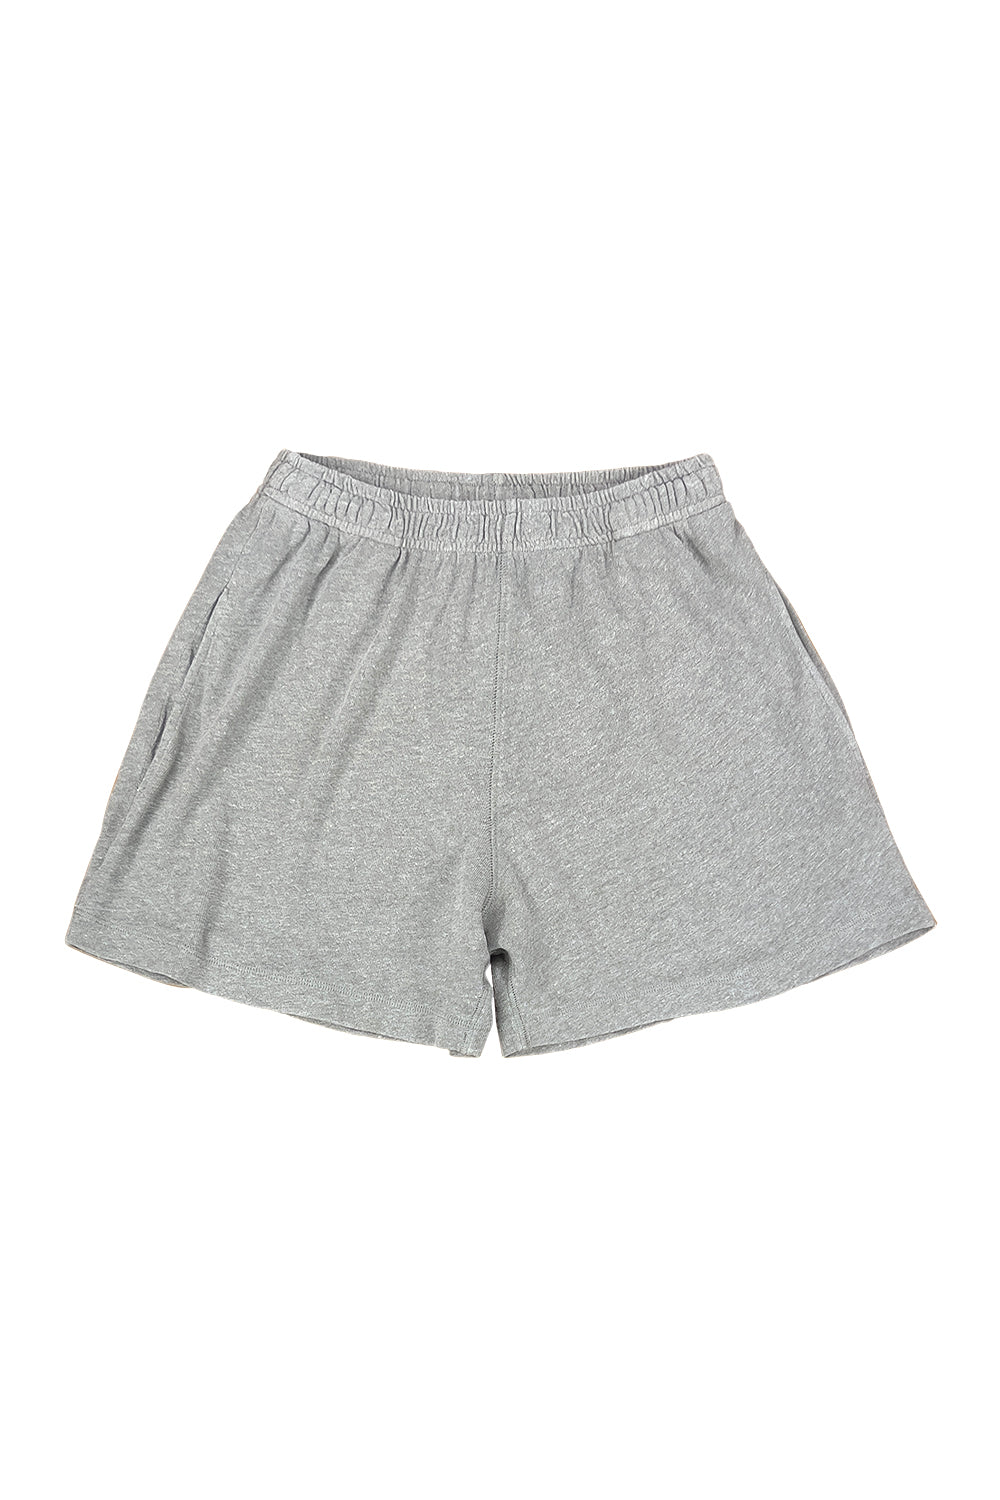 Heathered Sun Short | Jungmaven Hemp Clothing & Accessories / Color: Athletic Gray